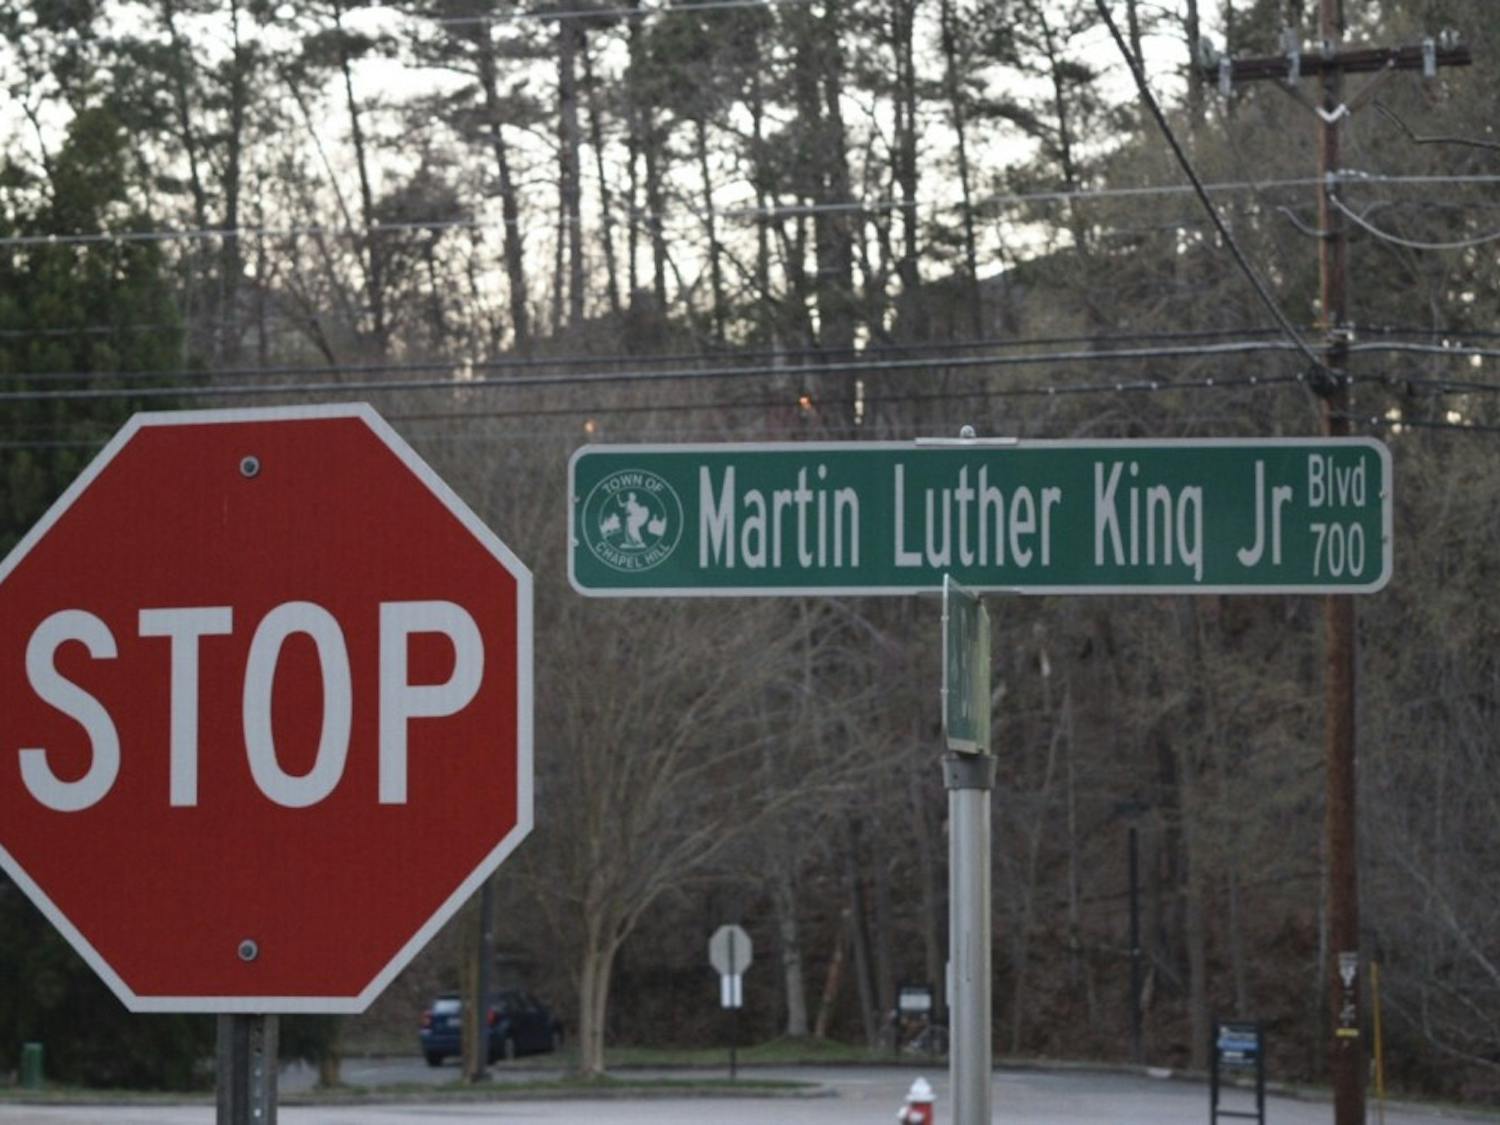 Martin Luther King Jr. Blvd. is one of the designated Opportunity Zones in Orange County, along with South Estes Drive, that was approved by the Town of Chapel Hill on Tuesday, Feb. 28, 2019. 